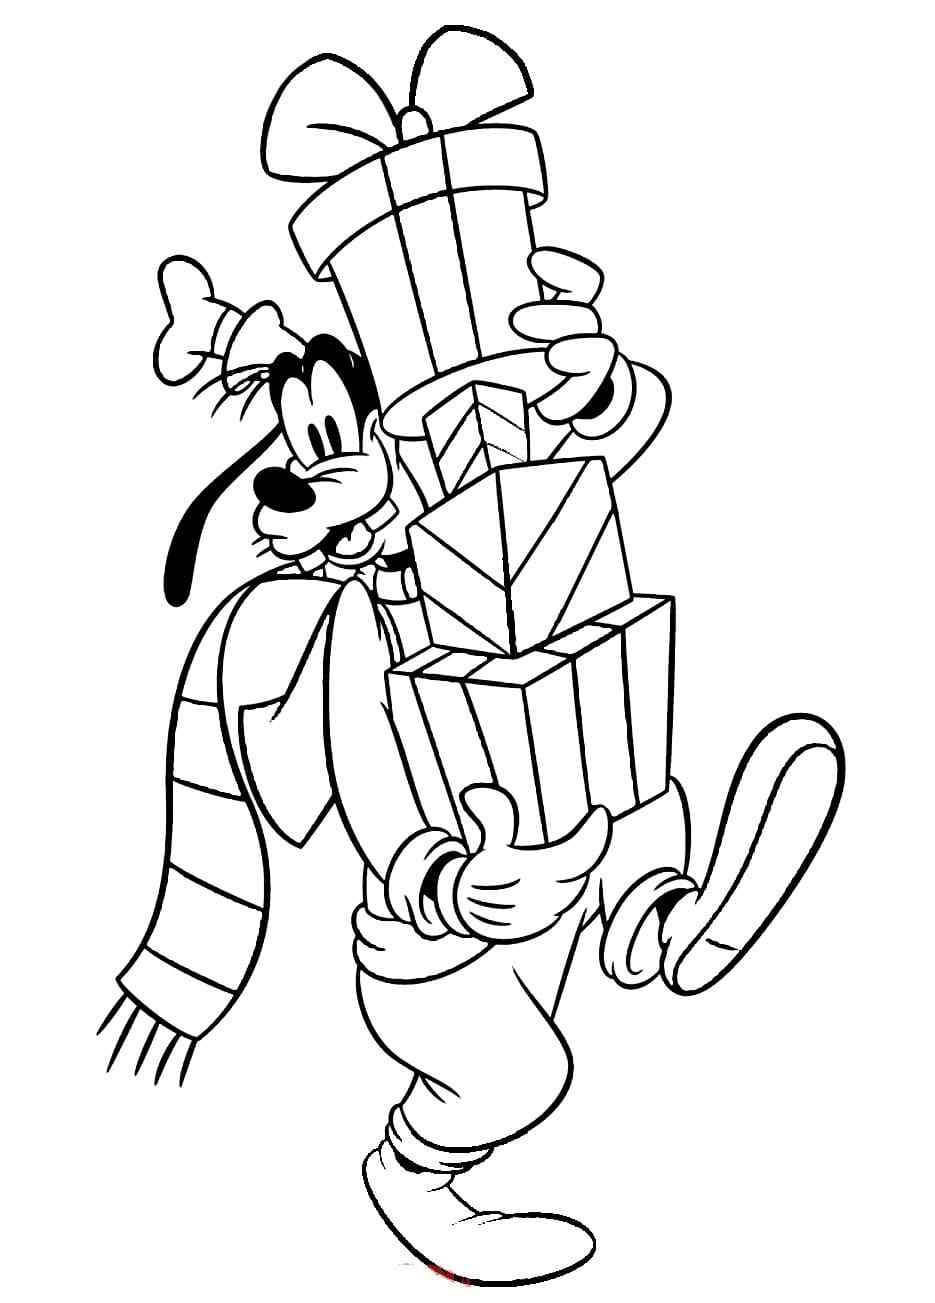 Pyramid Of Gifts From Pluto Coloring Page